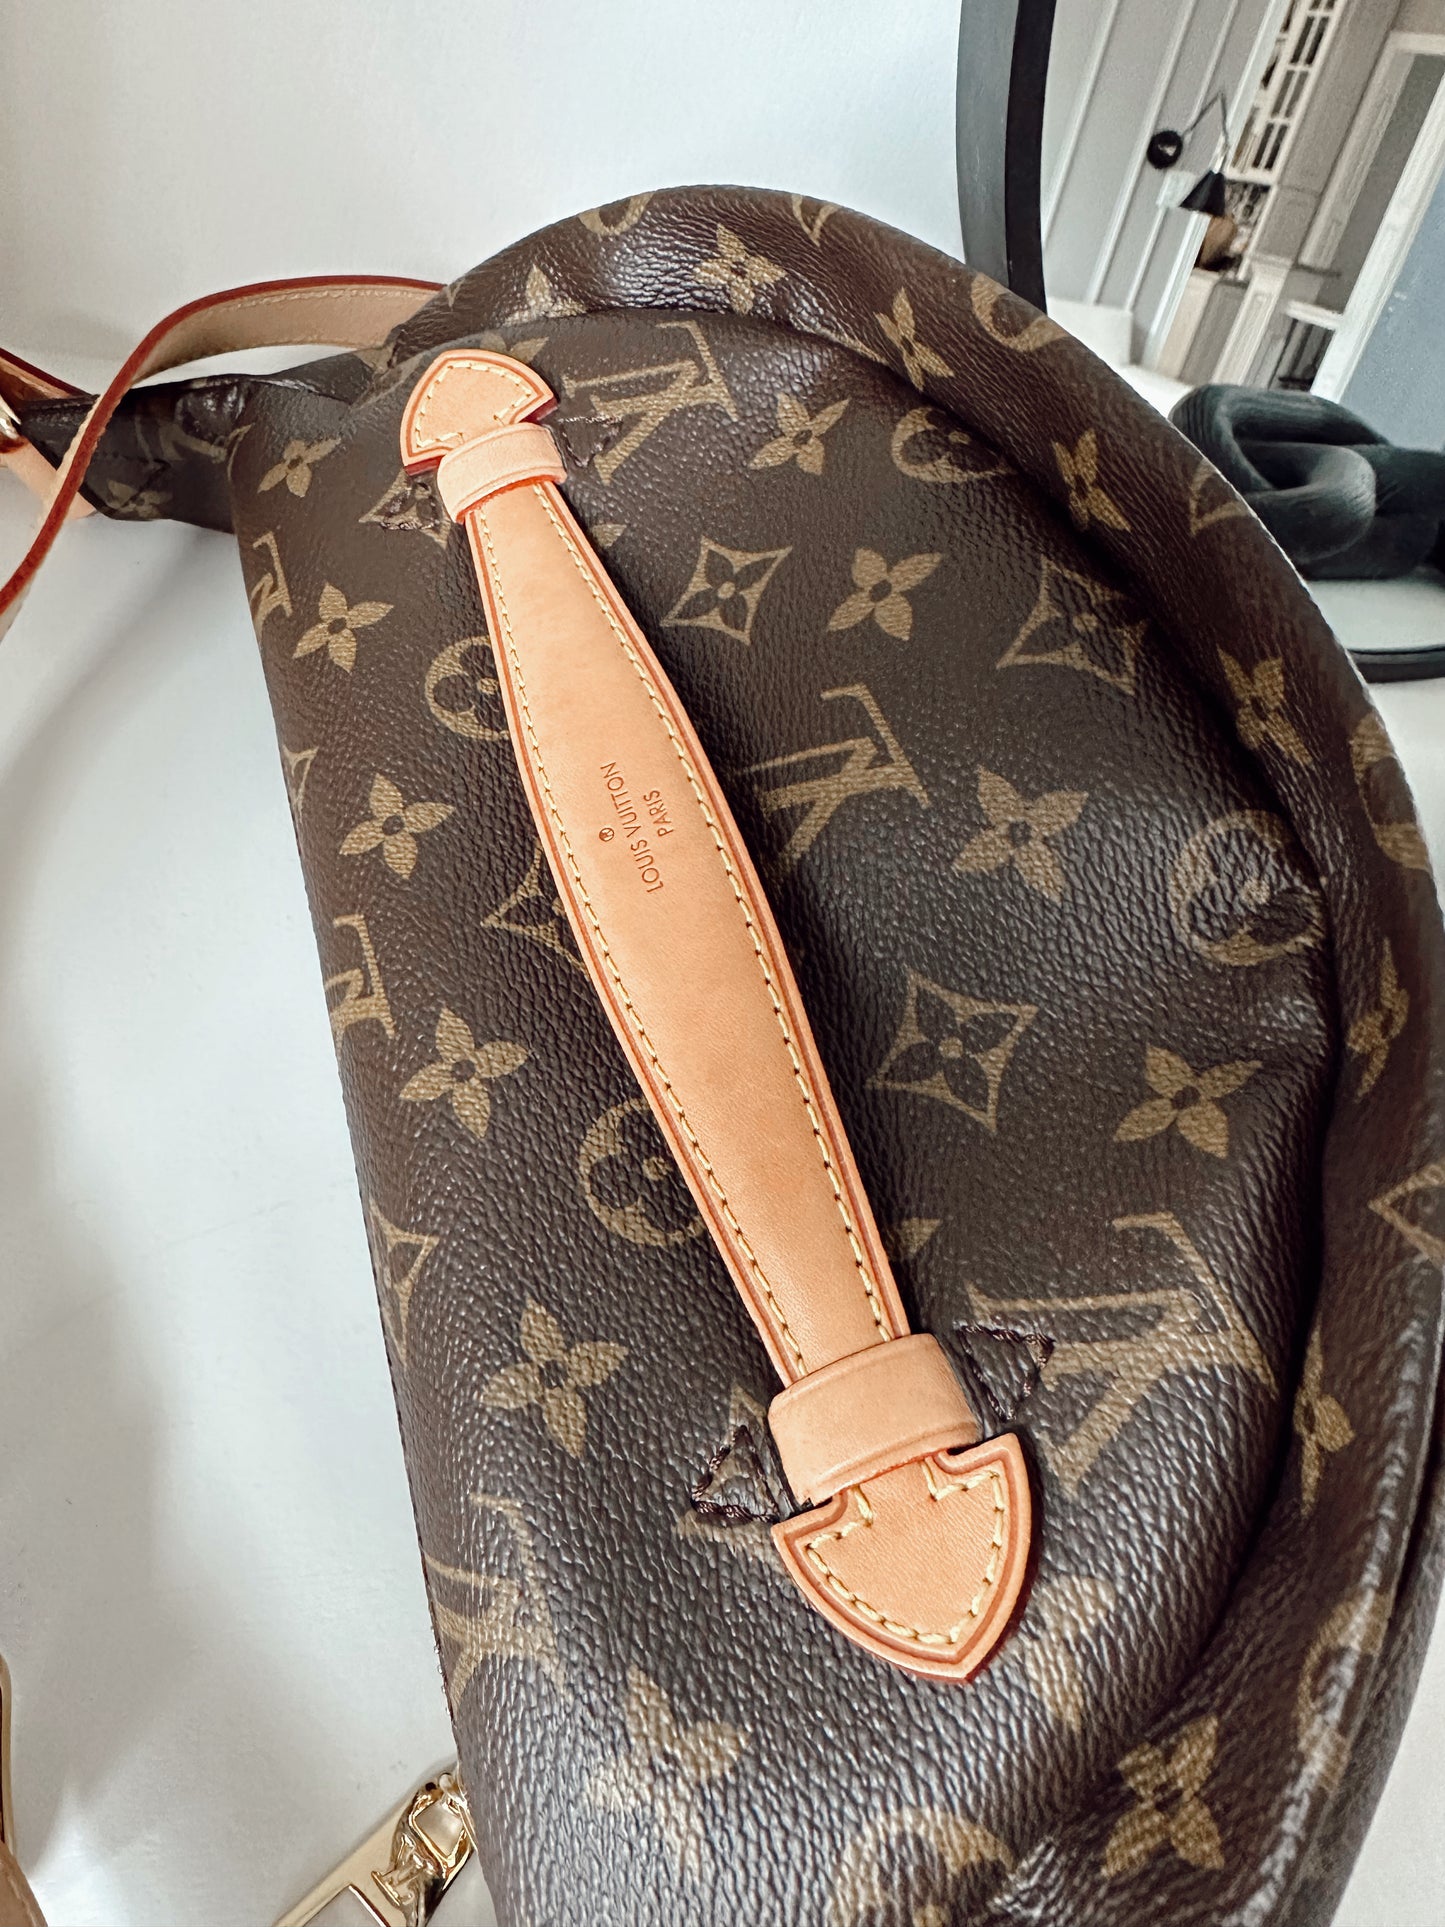 💕Louis Vuitton monogram bumbag with dustbag, microchip and